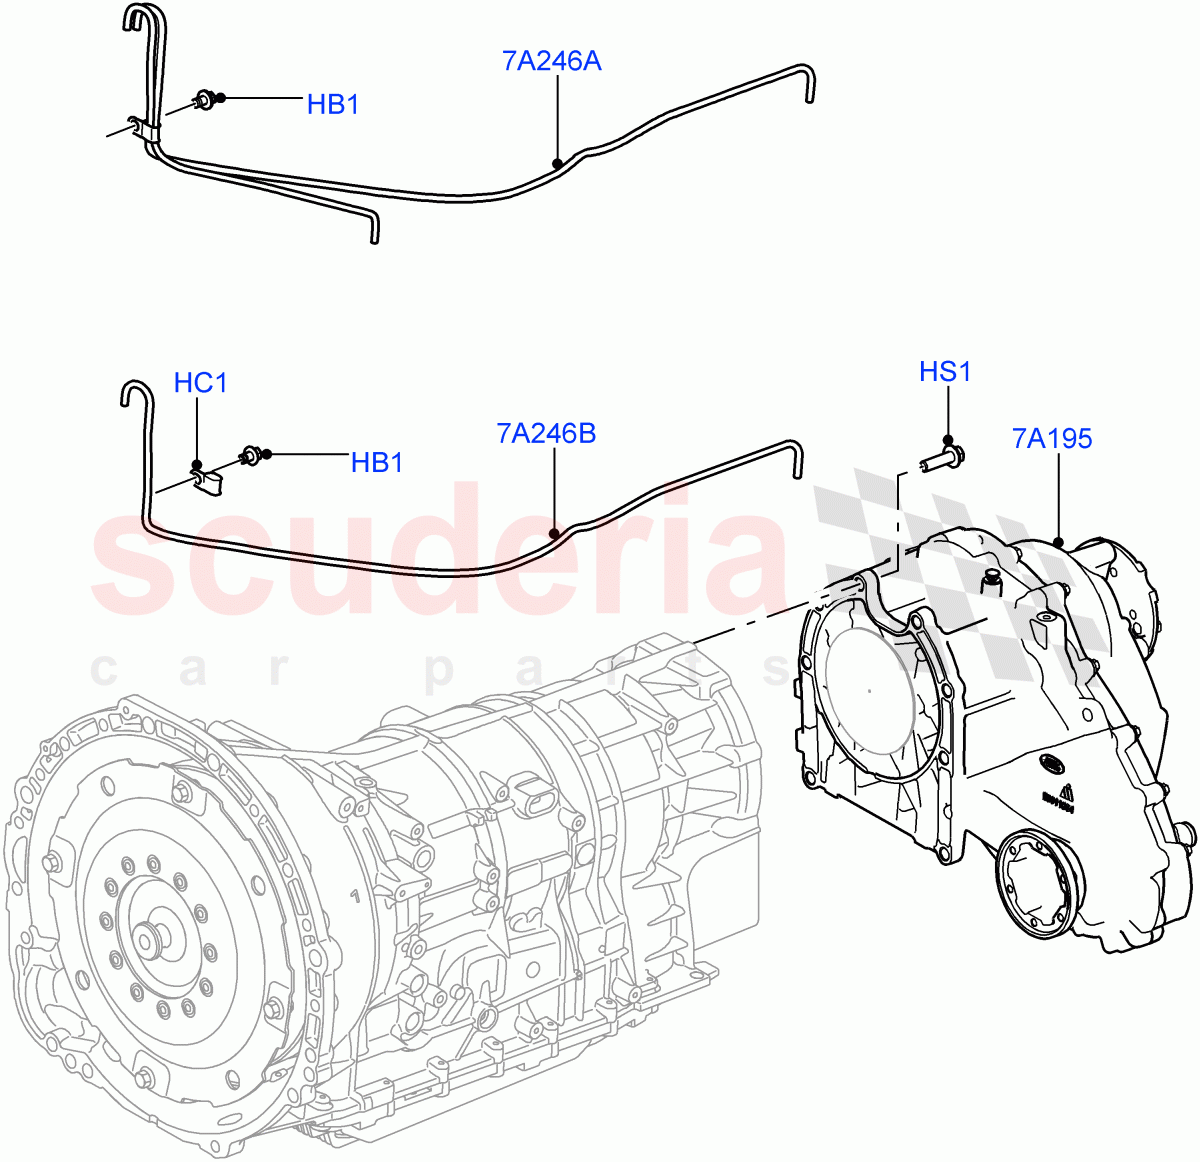 Transfer Drive Case(8 Speed Auto Trans ZF 8HP70 4WD,With 1 Speed Transfer Case,8 Speed Auto Trans ZF 8HP45)((V)FROMEA000001,(V)TOGA999999) of Land Rover Land Rover Range Rover (2012-2021) [3.0 I6 Turbo Petrol AJ20P6]